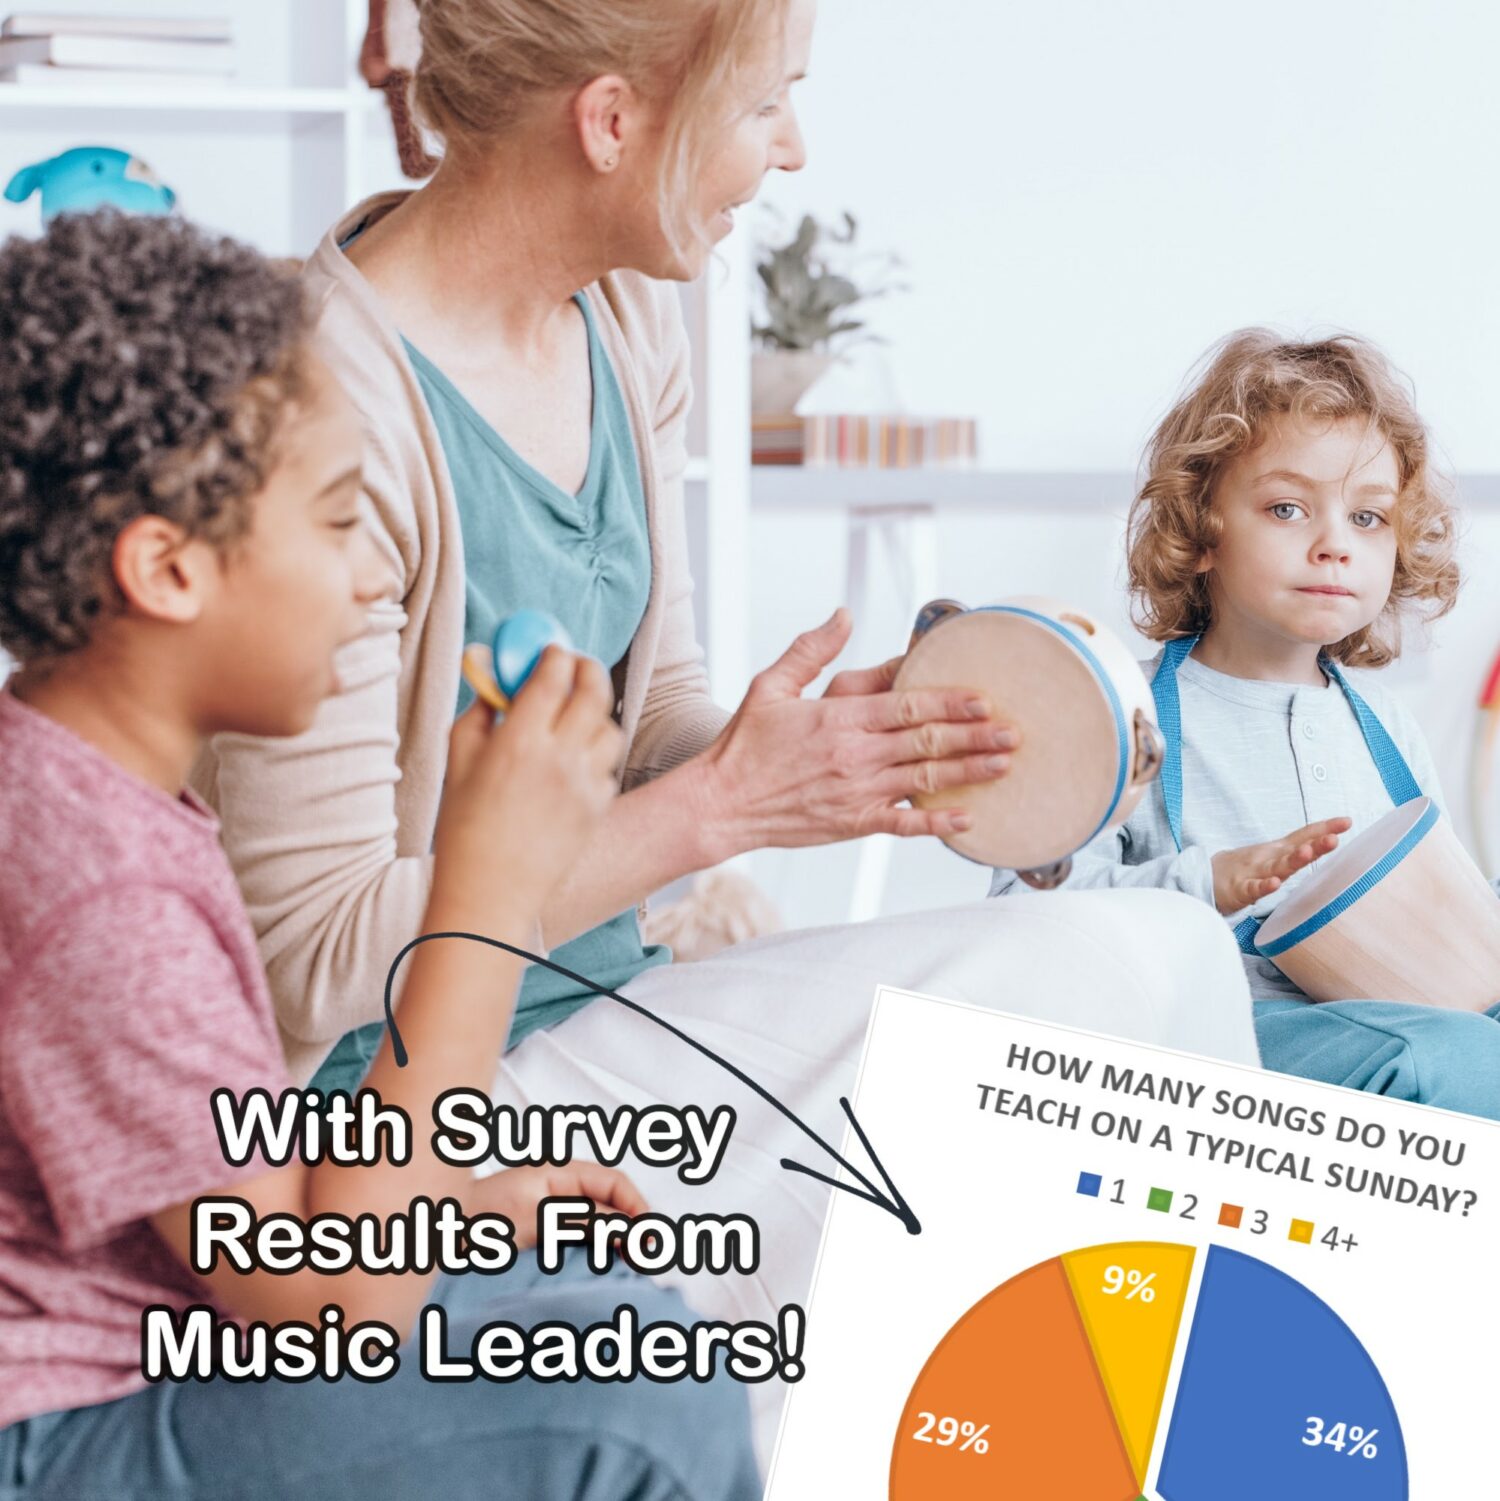 How Many Primary Songs should I teach? You'll love this DEEP dive into the most commonly asked questions from Primary Music Leaders such as how many songs they typically teach on a typical Sunday, if they sing transition or extra songs, how many verses to teach, and if they teach special songs! The answers are results from a survey with stats that are SO fascinating!